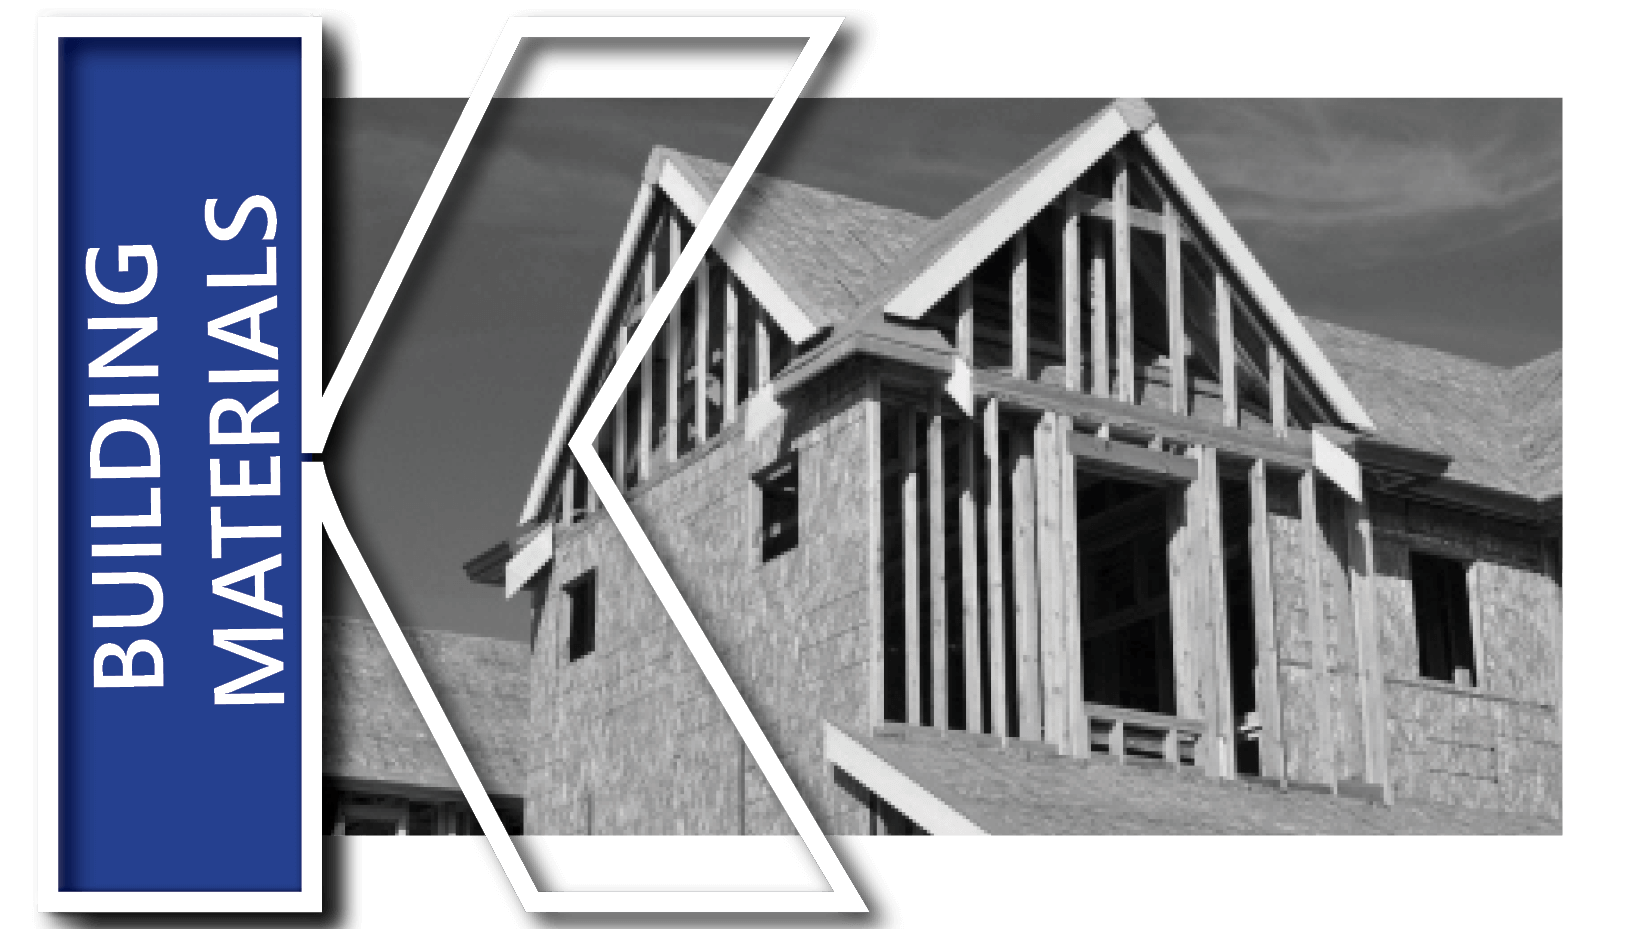 House being built with large K graphic to the left with Building Materials in text 